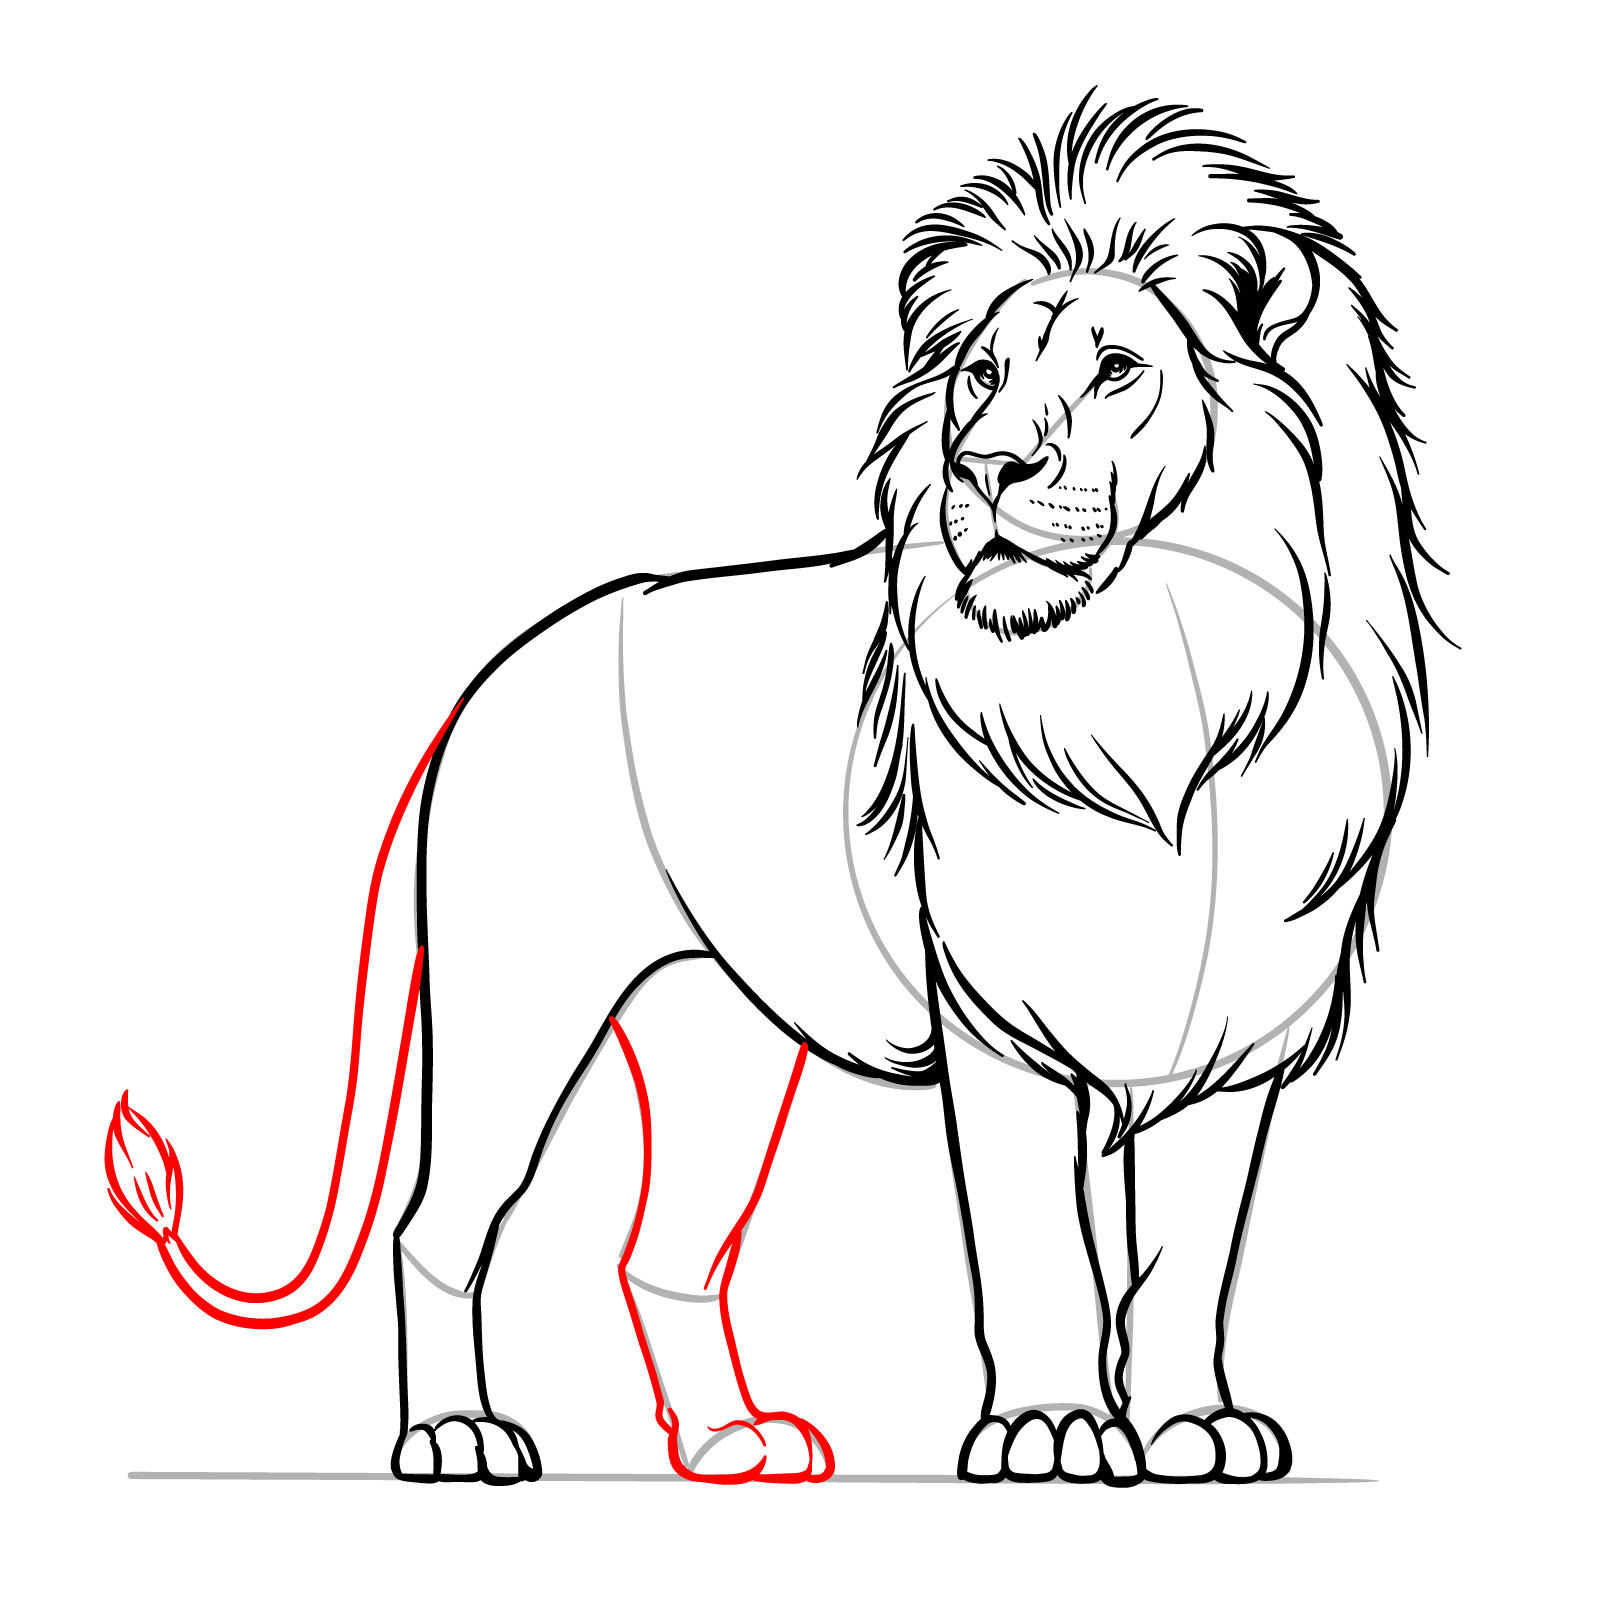 Adding the second rear leg and tail to the lion drawing process - step 13